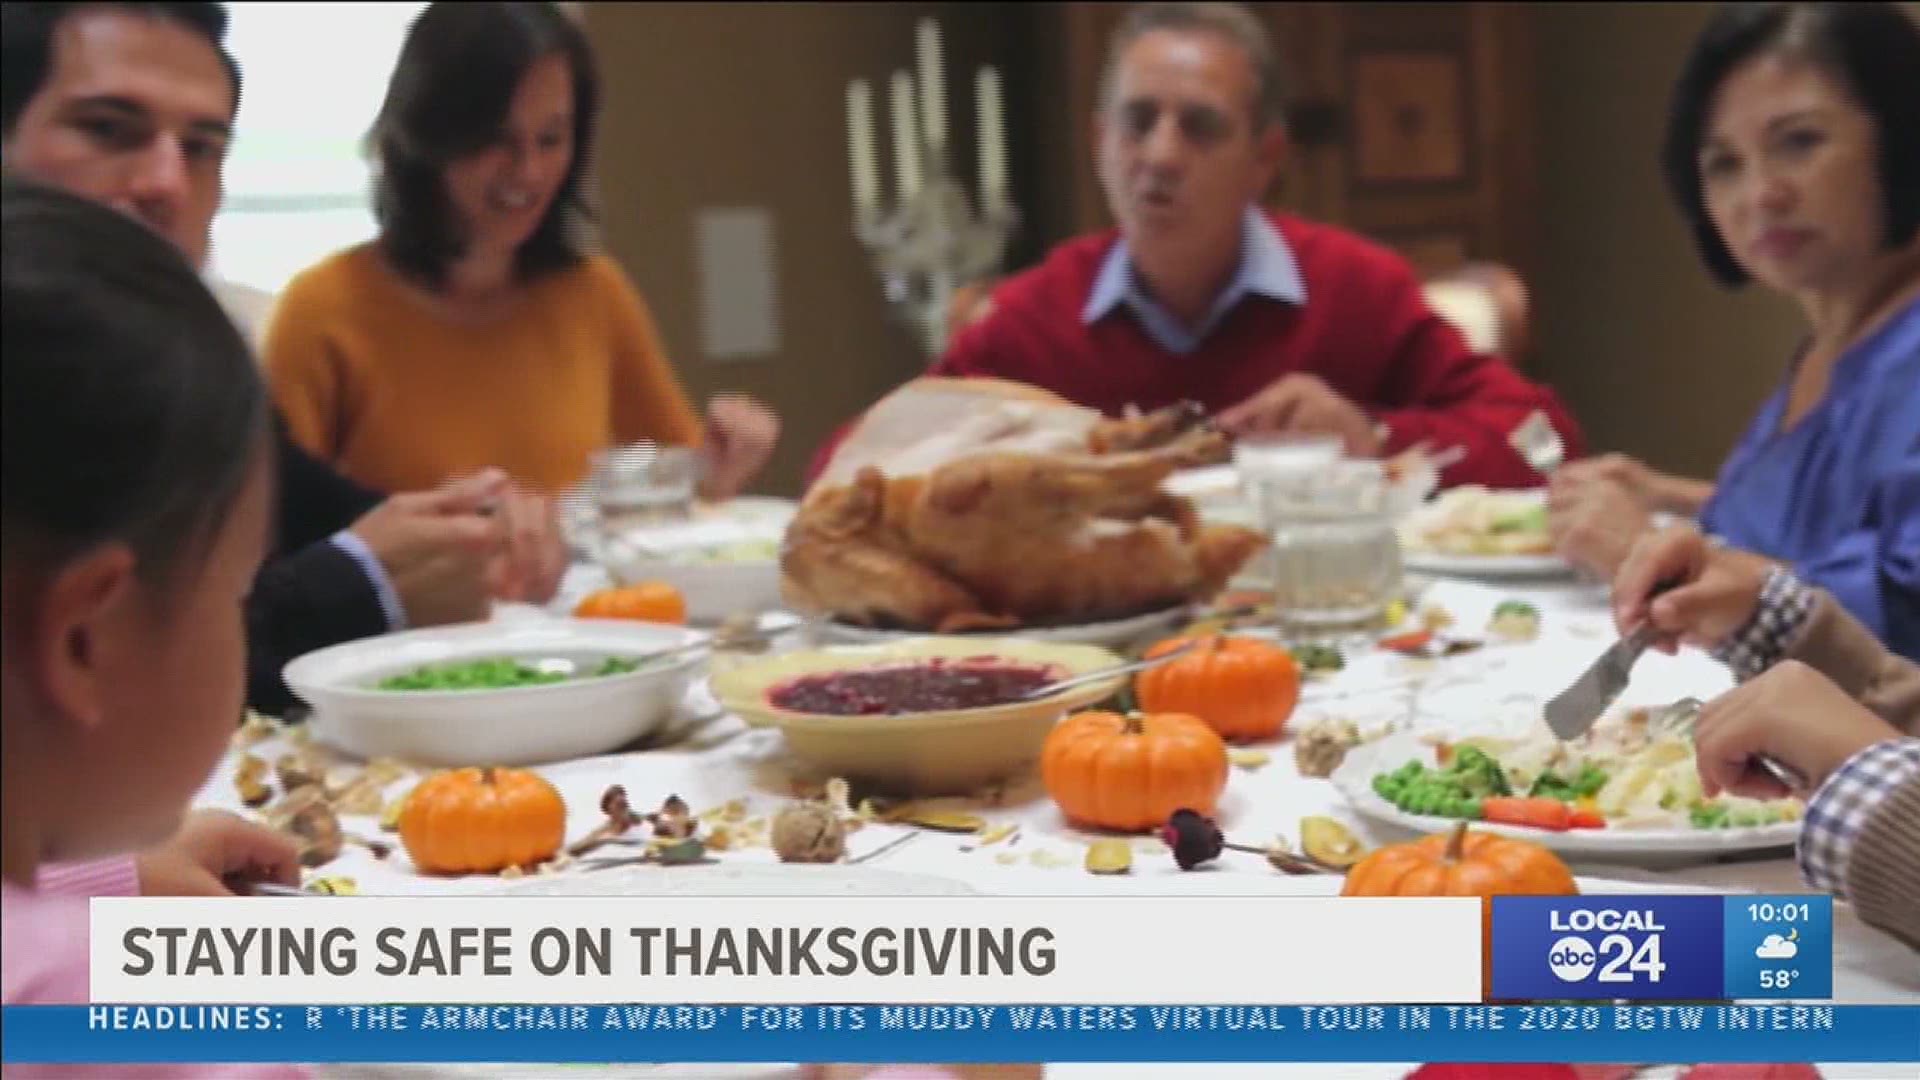 Although the Centers for Disease Control is recommending no travel for Thanksgiving, you can still find creative ways to connect with family.